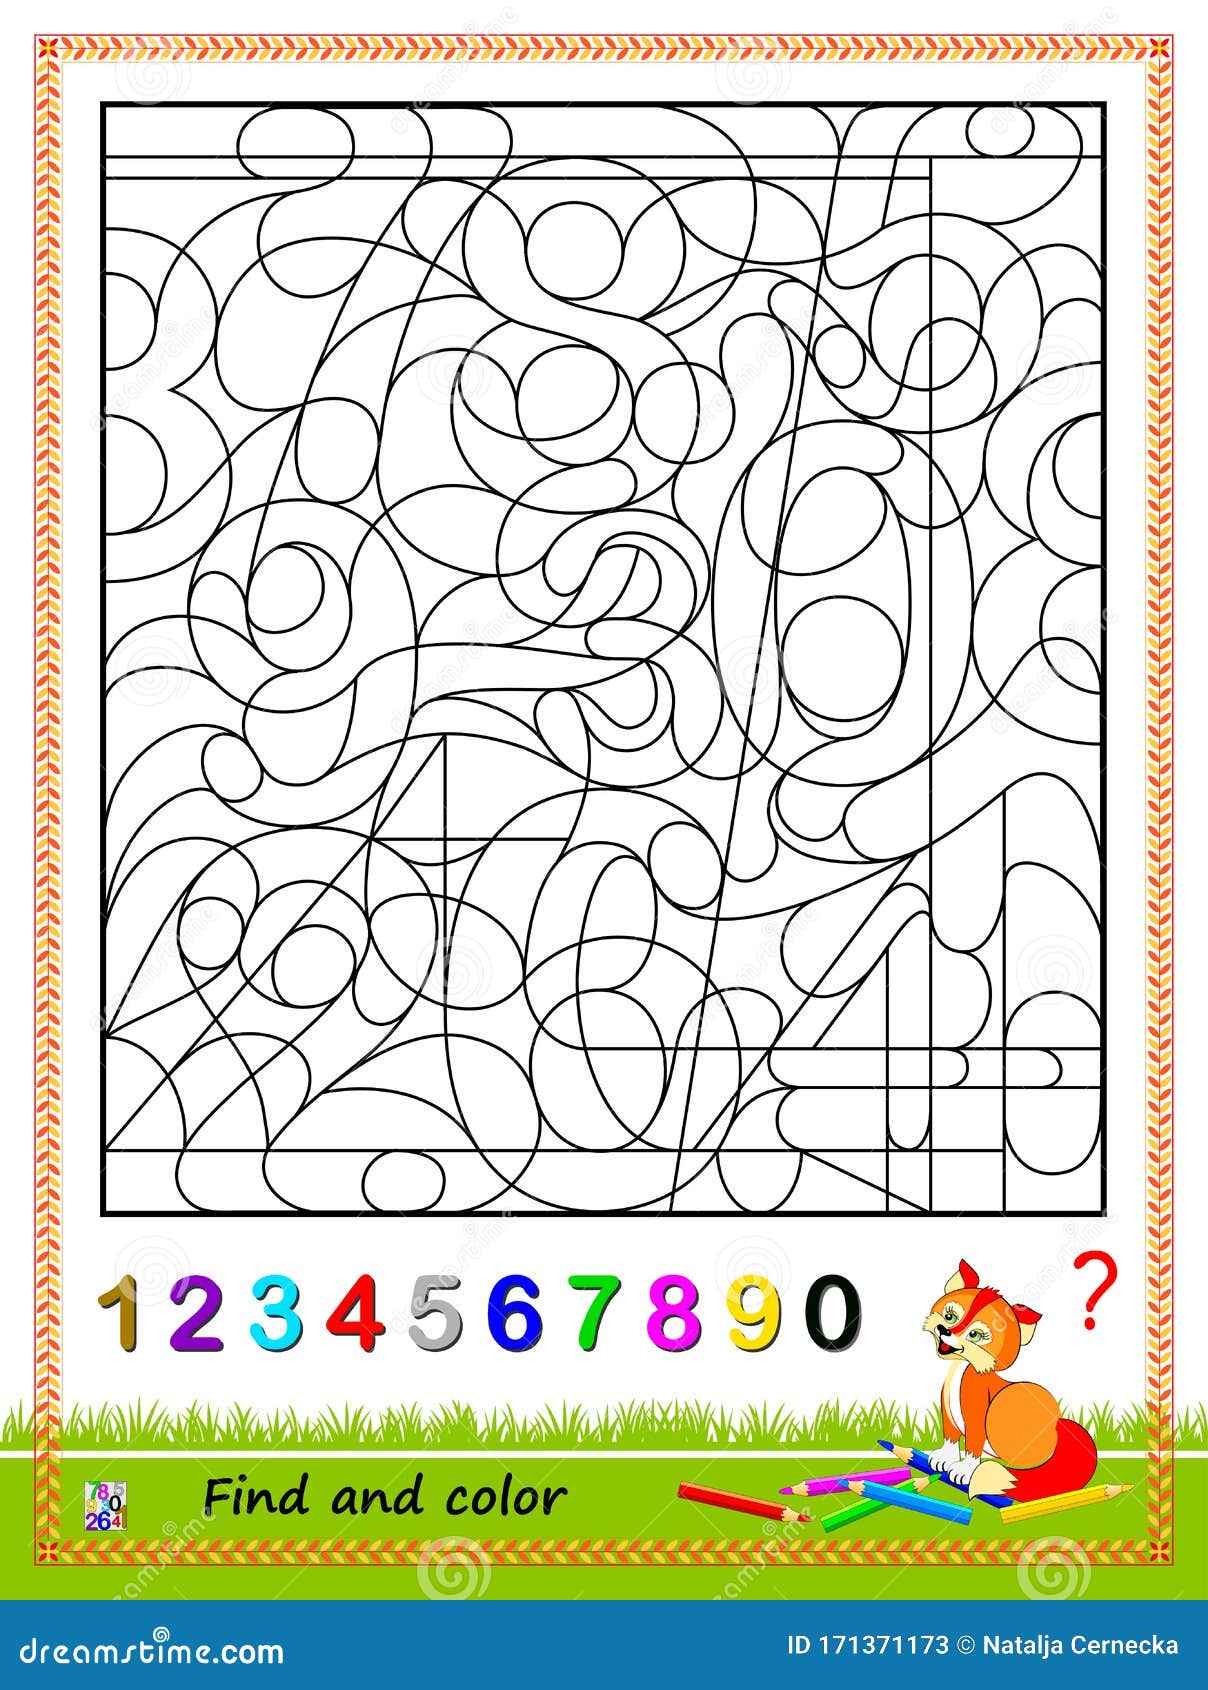 math education for kids. logic puzzle game. find and paint the numbers from 1 to 0. coloring book. printable worksheet.